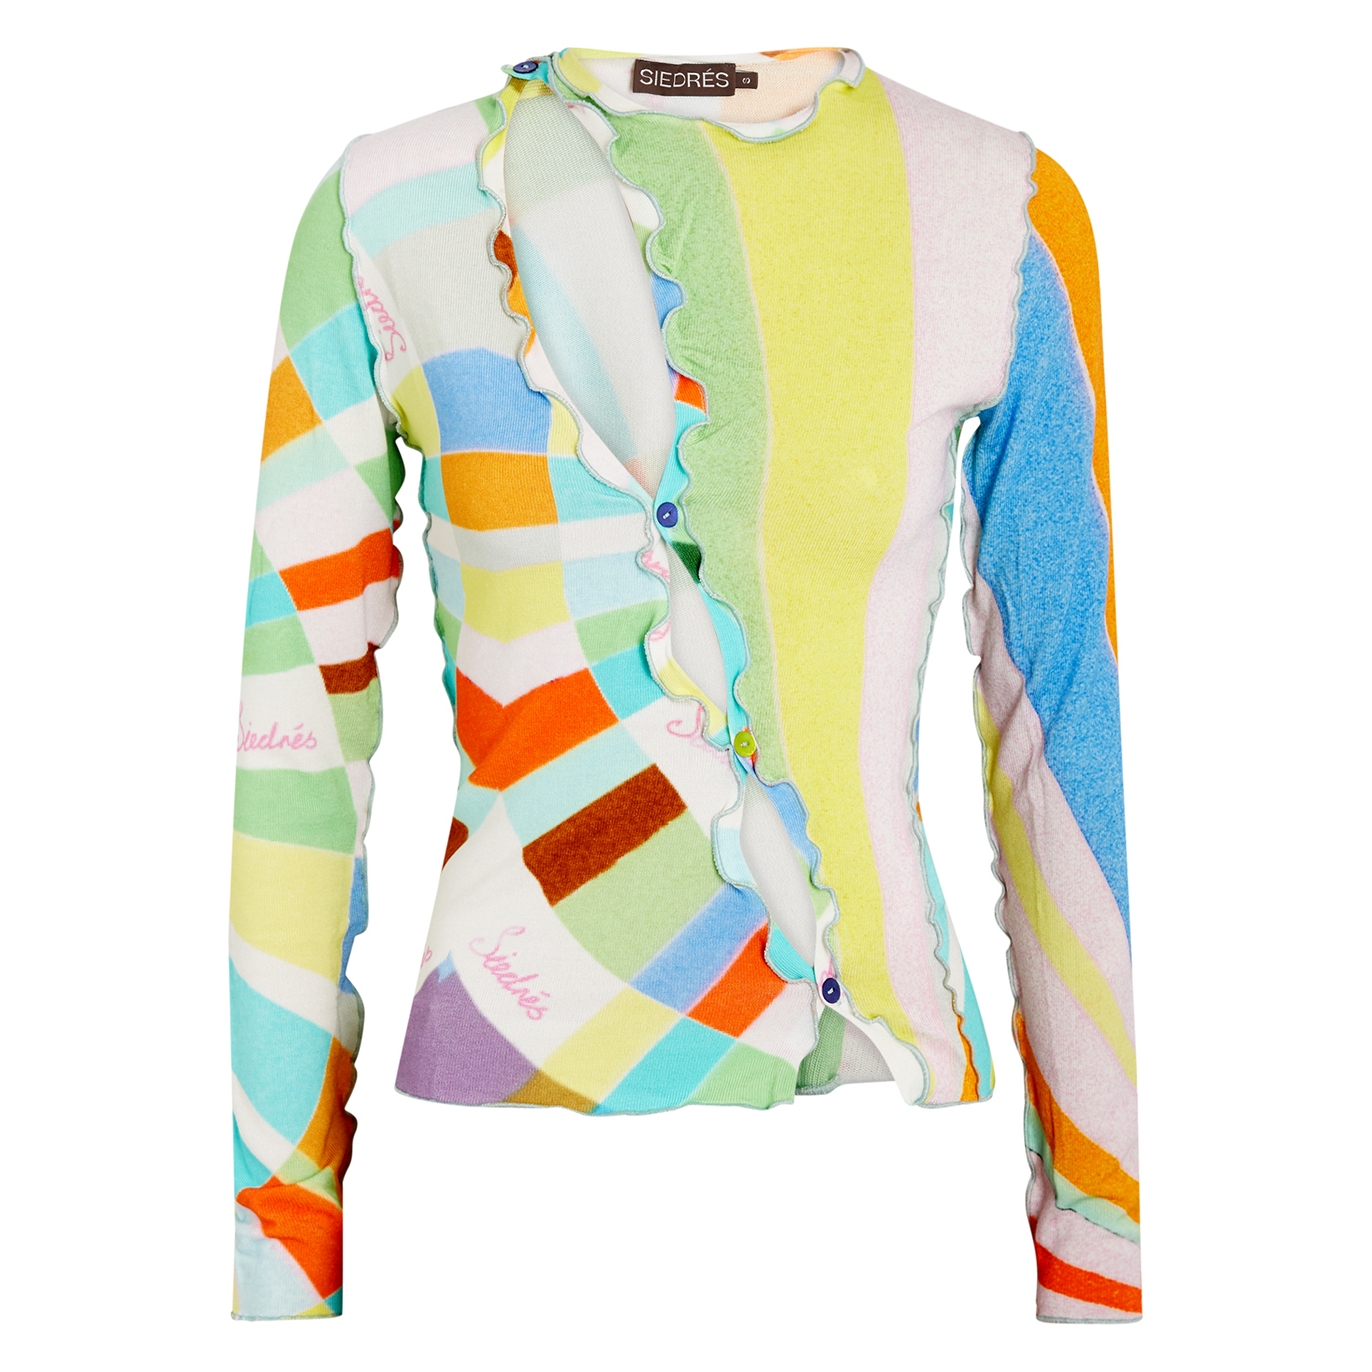 Siedres Maddie Printed Cut-out Stretch-jersey Top - Multicoloured - M